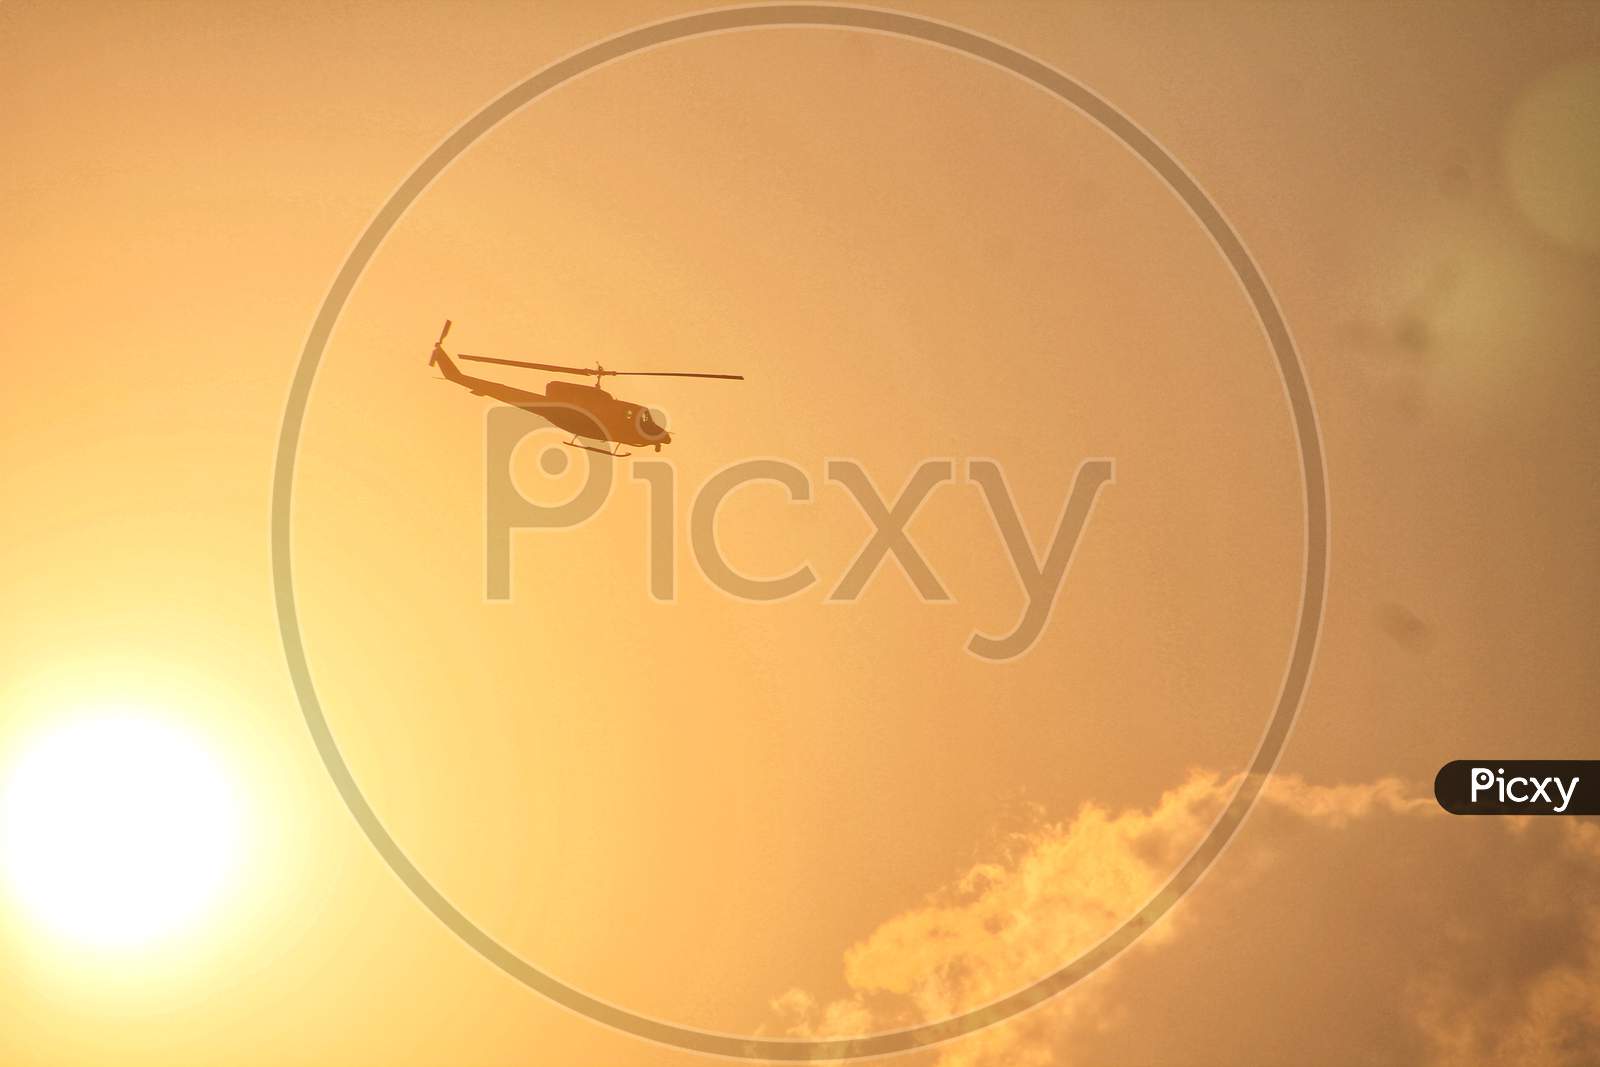 Bell 206 helicopterpassing behind the sun